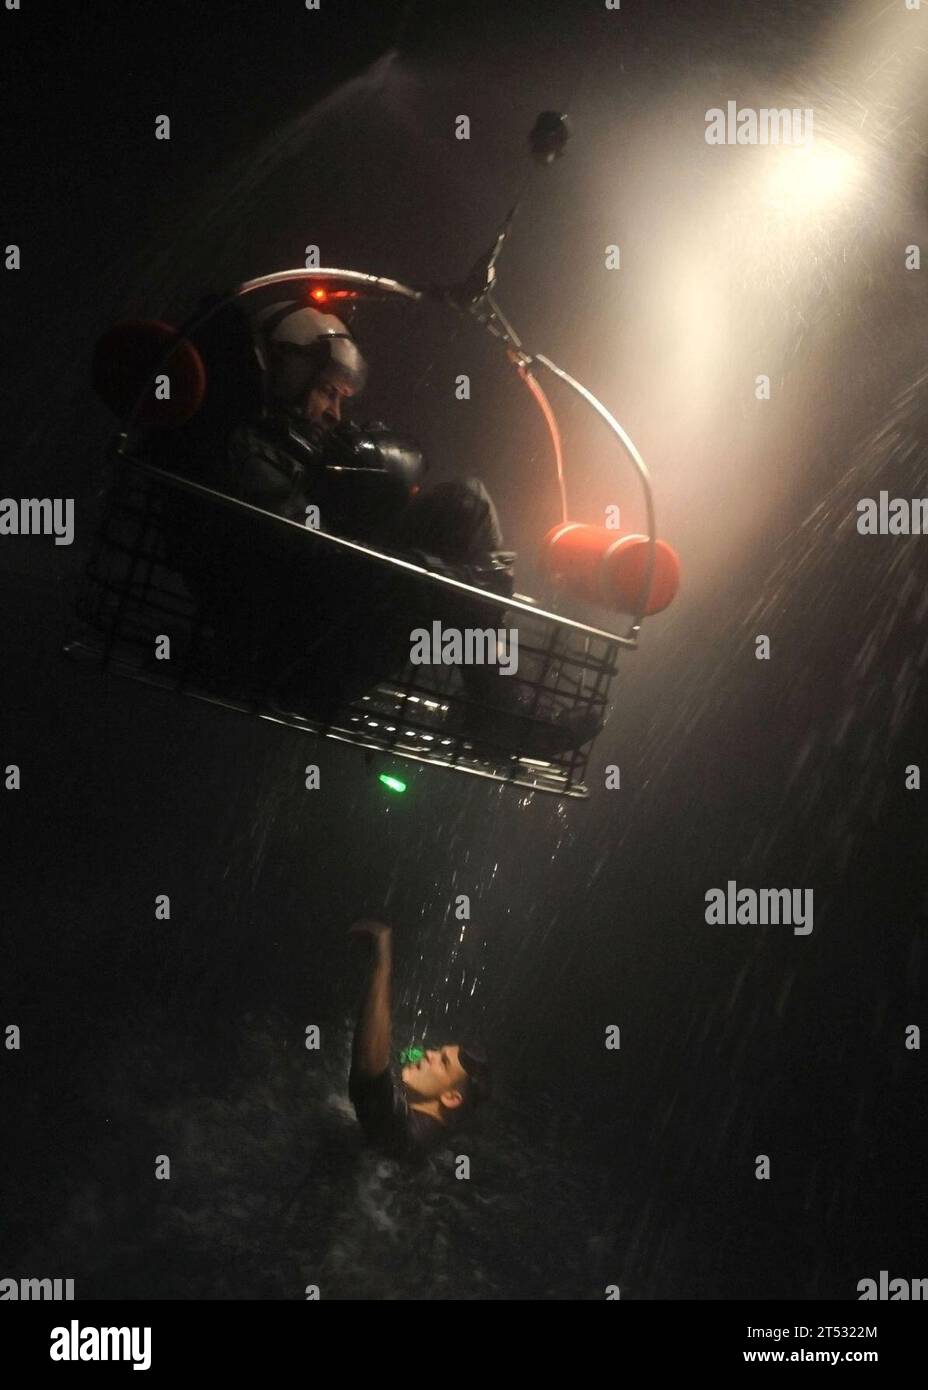 1102101810F-019 JACKSONVILLE, Fla. (Feb. 10, 2011) A student at the Aviation Survival Training Center (ASTC) ascends on a hoist during a simulated night exercise as part of an aircrew refresher course in Jacksonville, Fla. The ASTC provides courses for naval aircrew personnel and operates under the aegis of Navy Medicine Support Command. Stock Photo